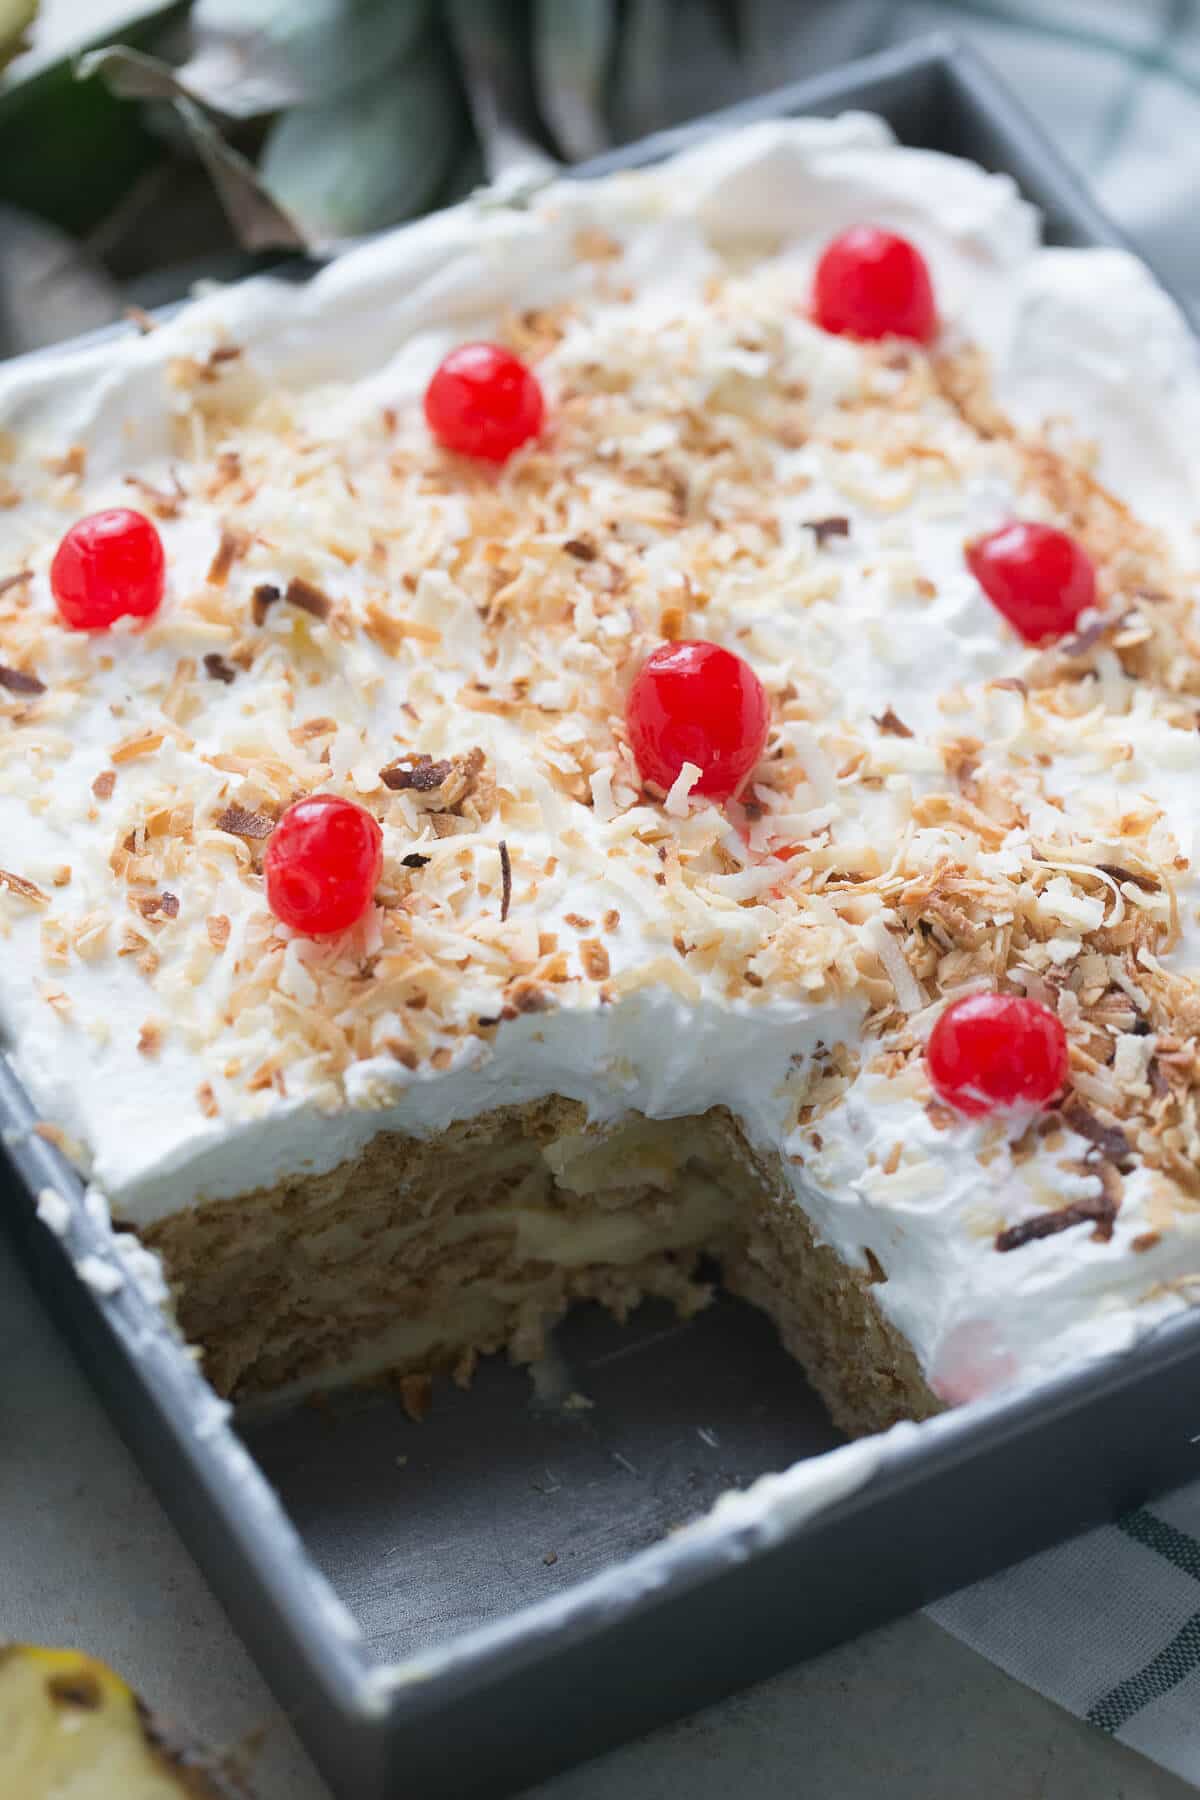 An ice box cake is the perfect no bake cake and this pina colada is a great summer version!